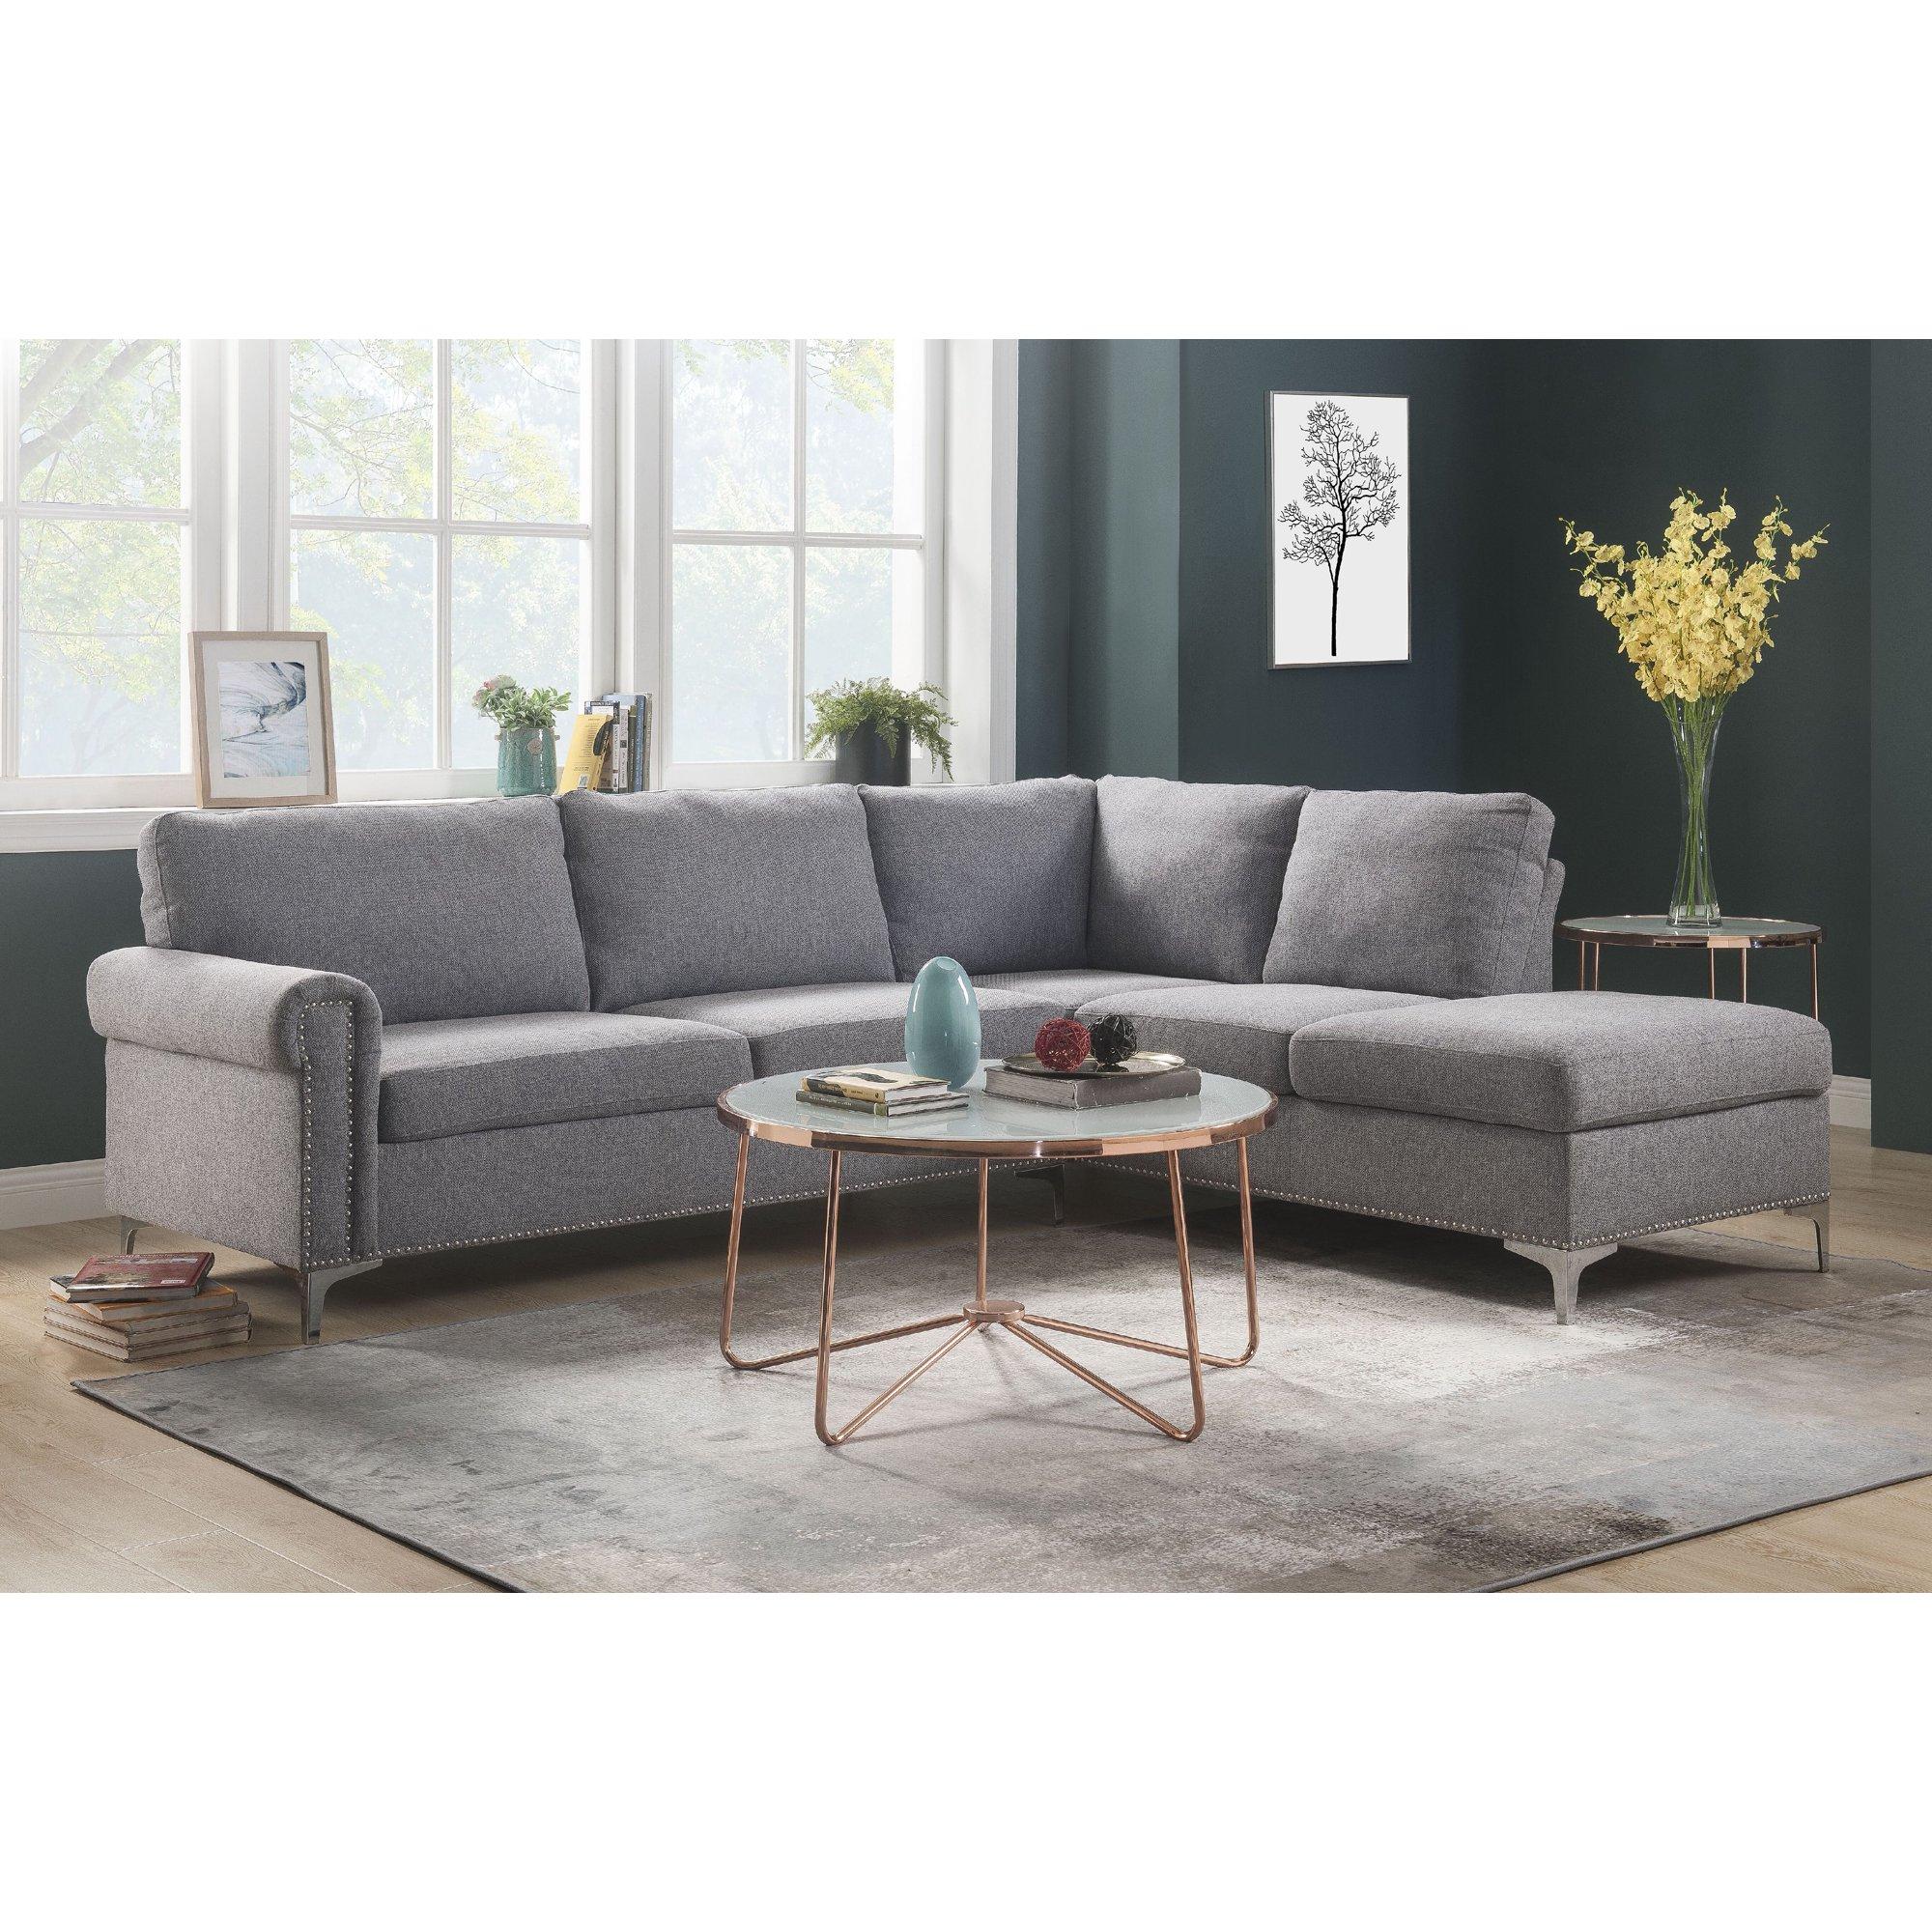 Contemporary, Modern L-shape Sectional Melvyn 52545 in Gray Fabric